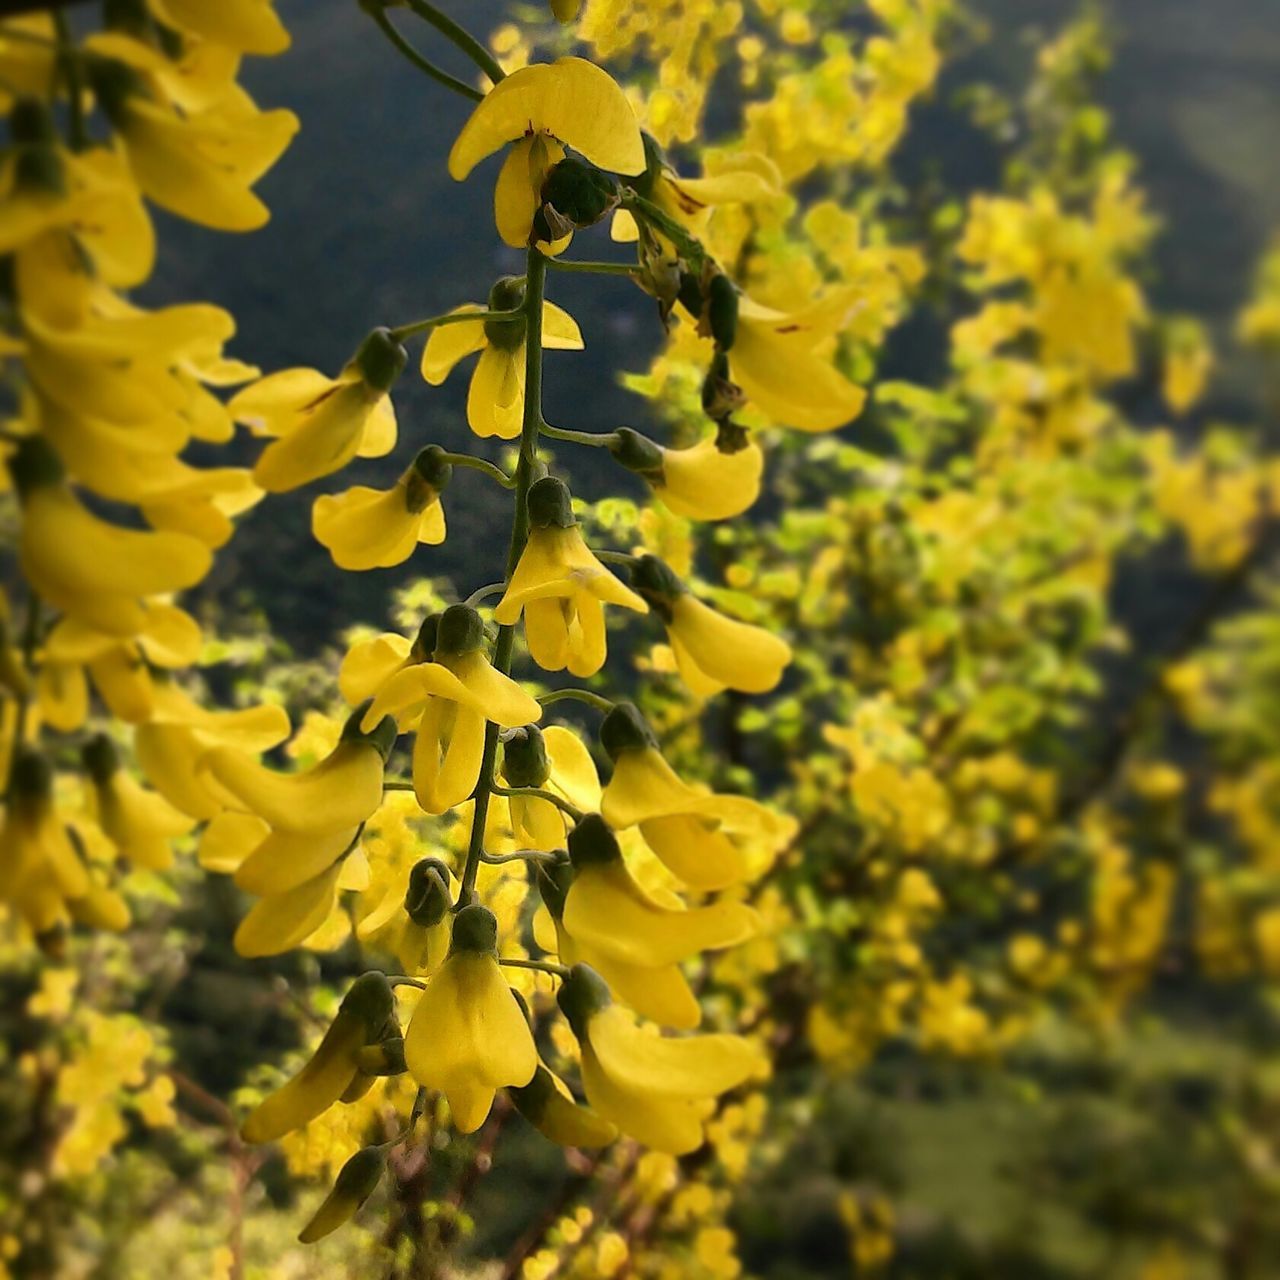 yellow, flower, growth, freshness, beauty in nature, fragility, nature, focus on foreground, petal, close-up, selective focus, plant, blooming, in bloom, outdoors, day, no people, tree, blossom, botany